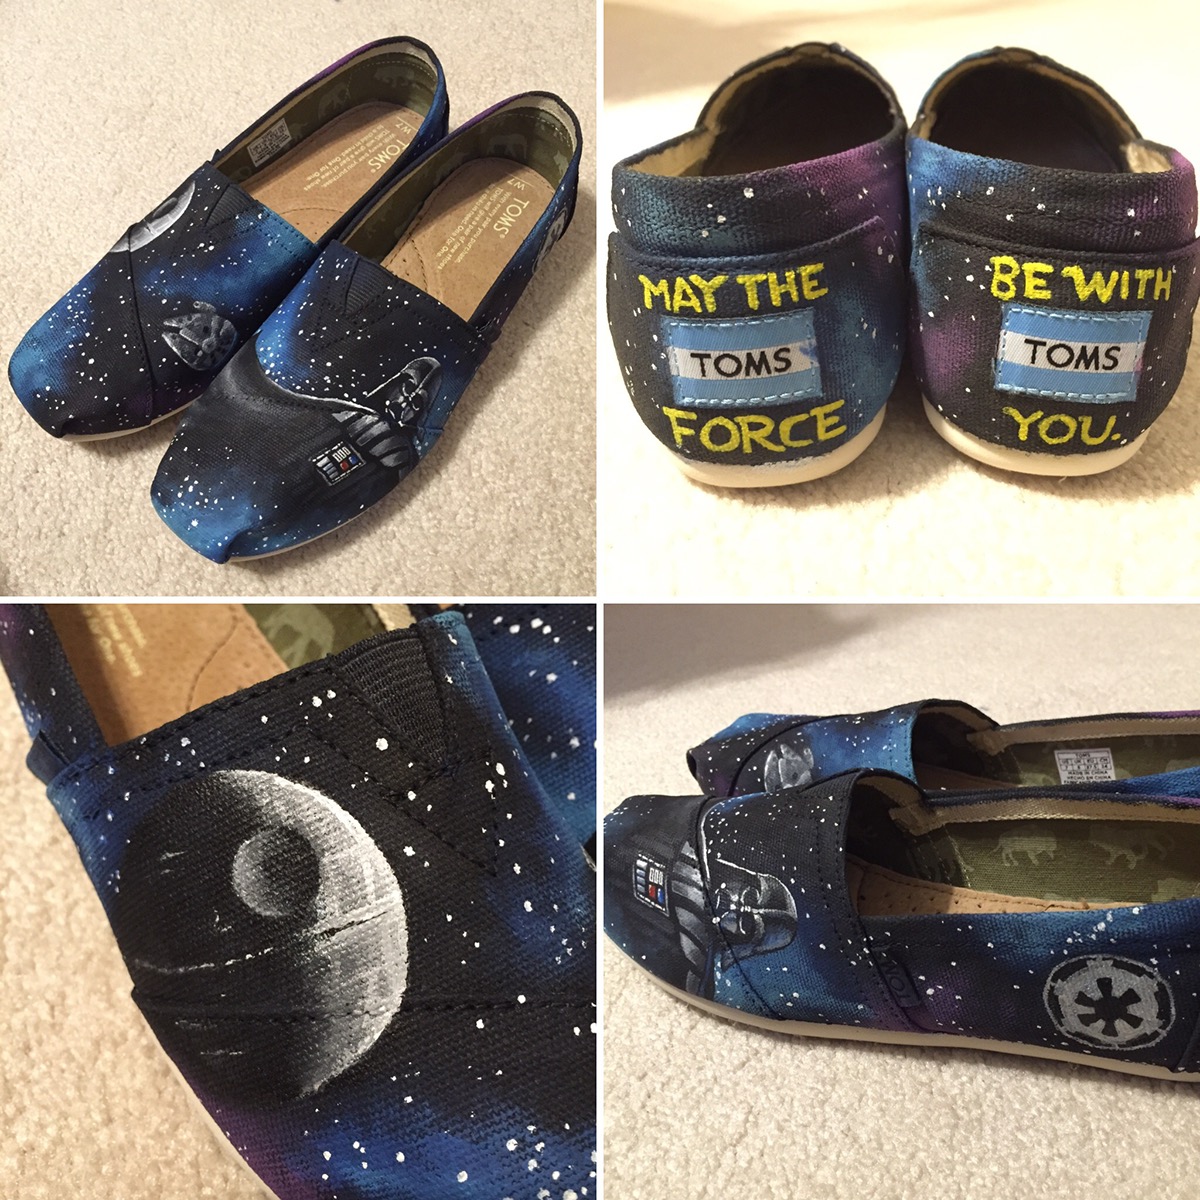 shoes custom shoes star wars tangled harry potter marauder's map virginia tech Hokies unicorns frozen olaf merry and pippin Tolkien LOTR Slytherin